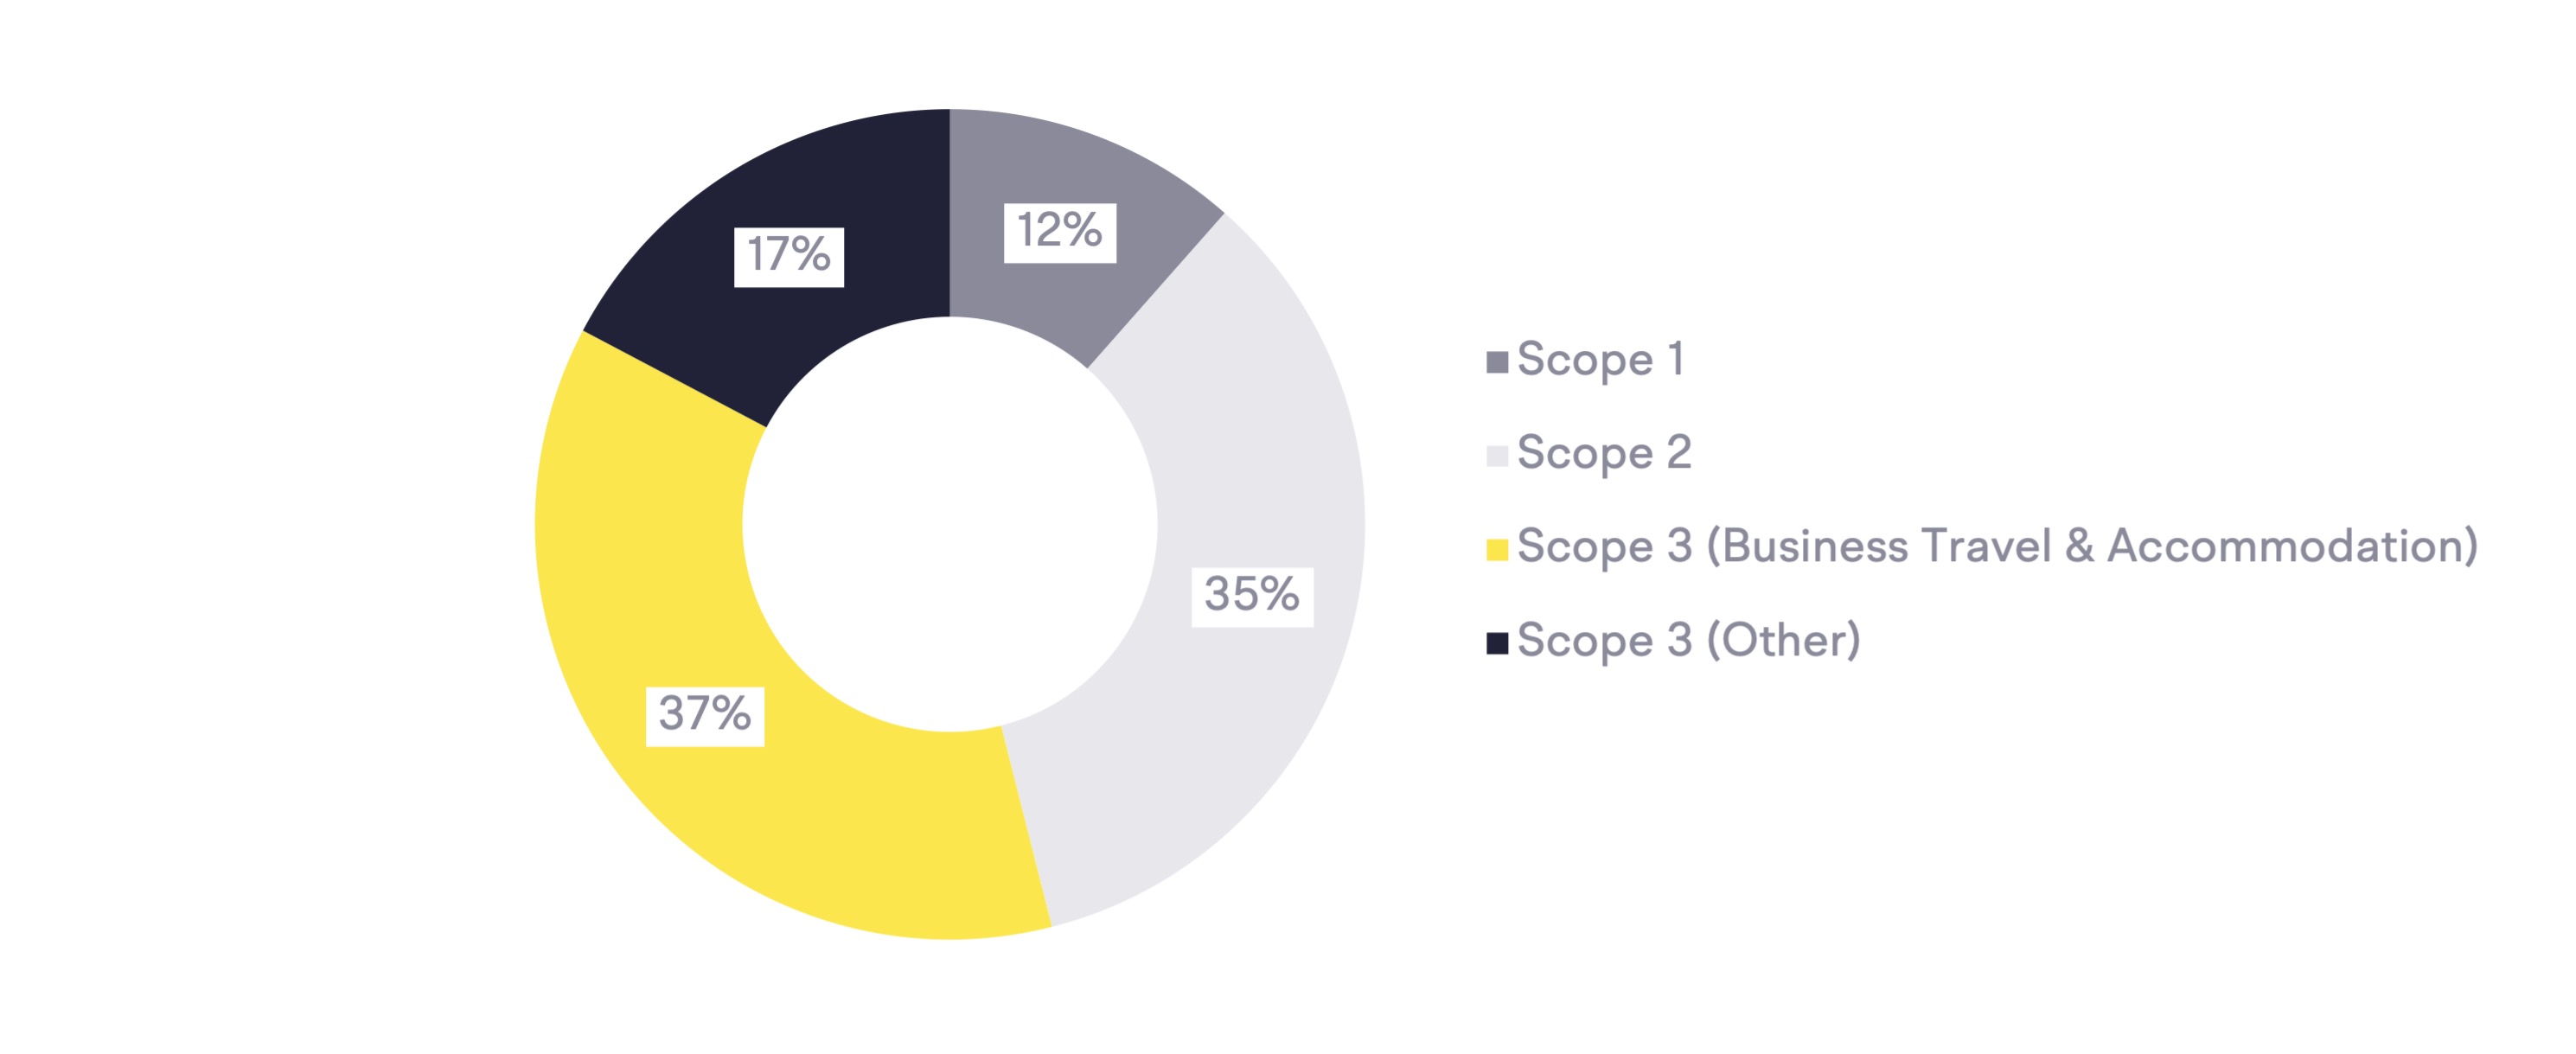 Carbon footprint of an average design services company pie chart